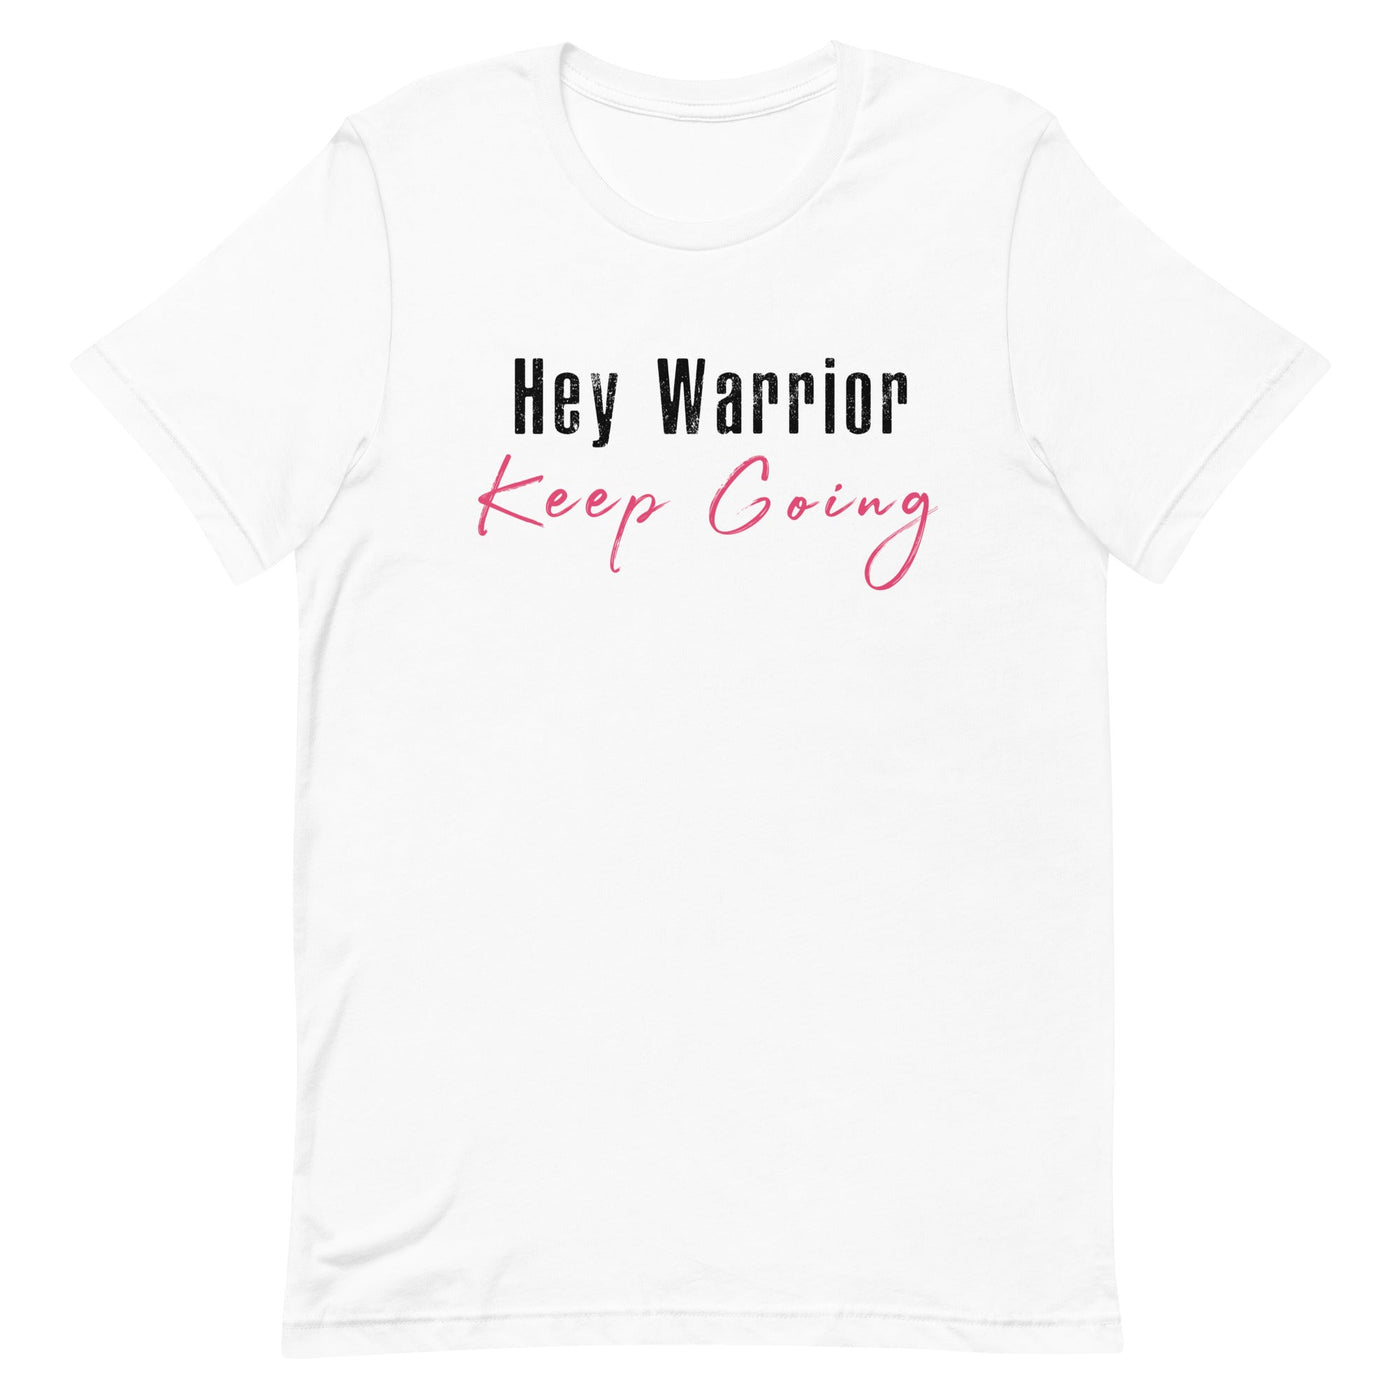 HEY WARRIOR KEEP GOING WOMEN'S T-SHIRT- BLACK AND PINK FONT White S 